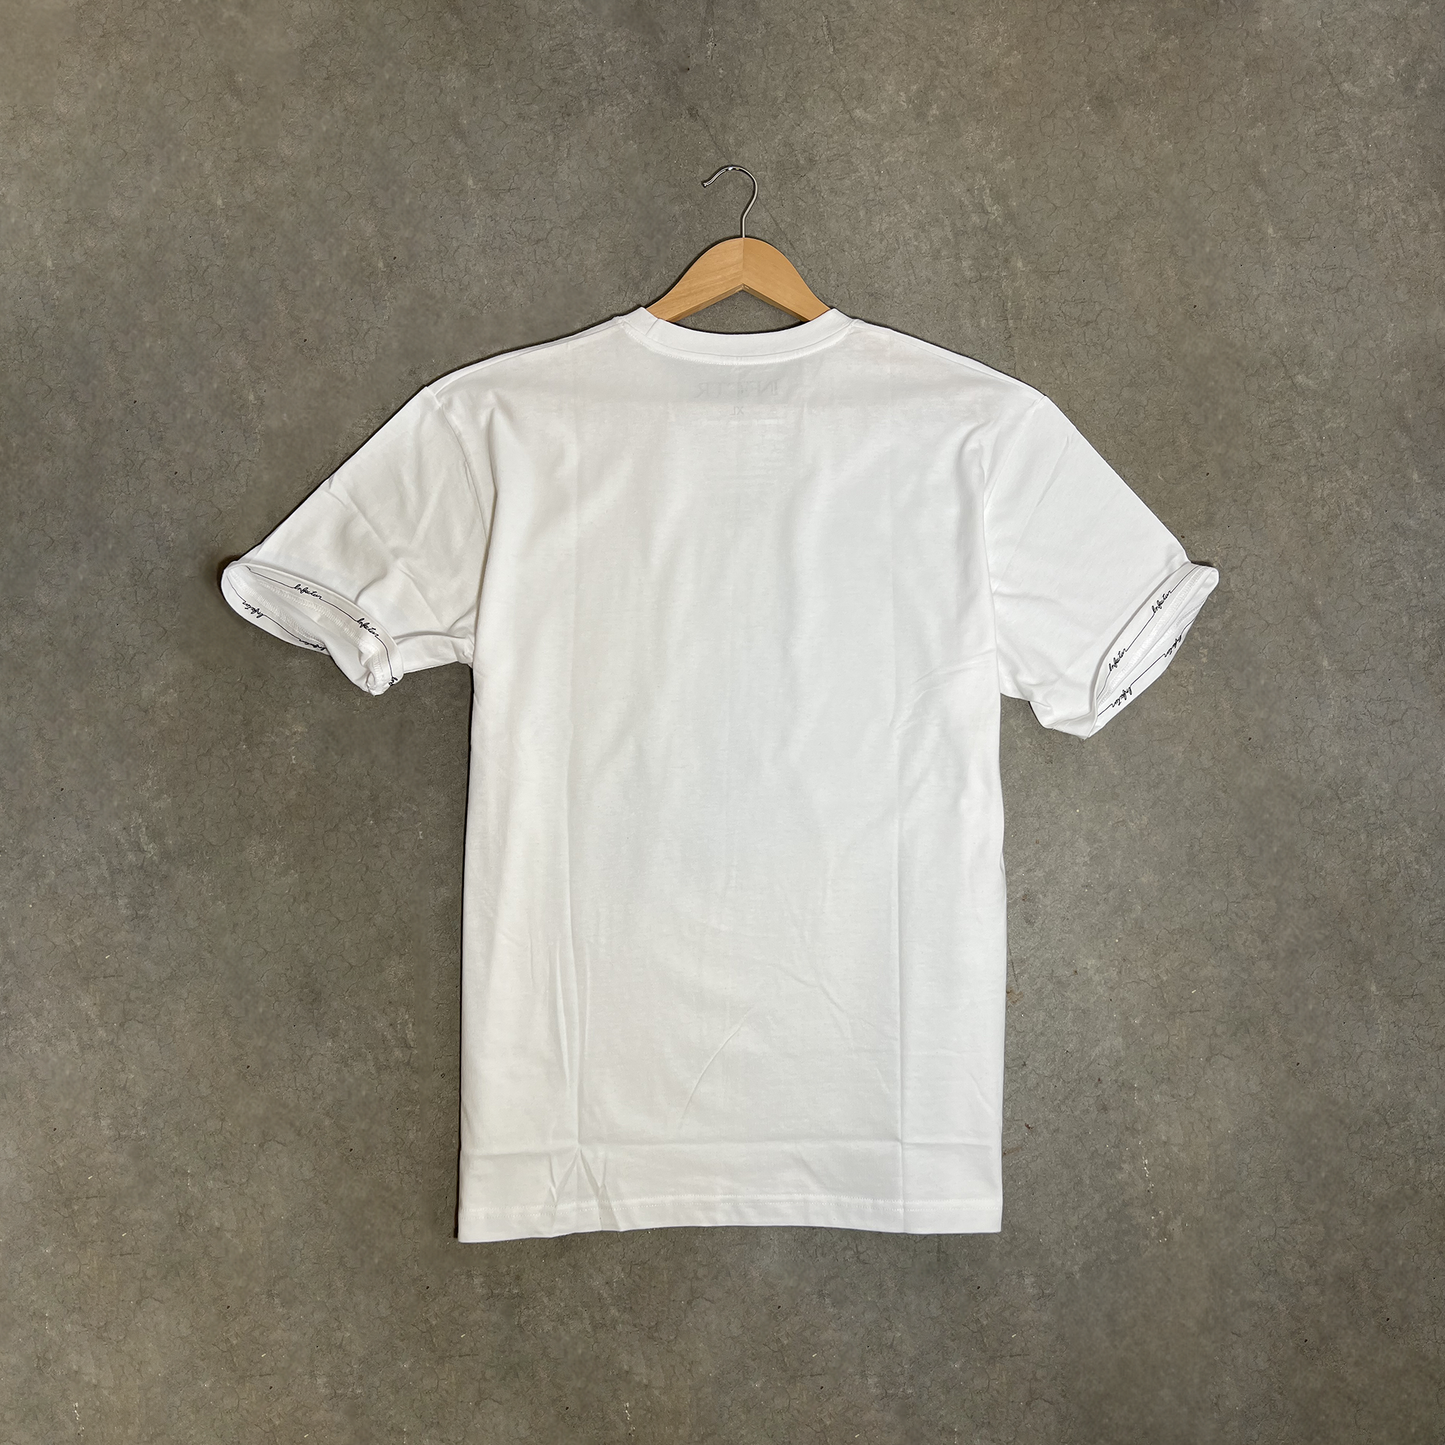 INFECTUR 3D Tee - White